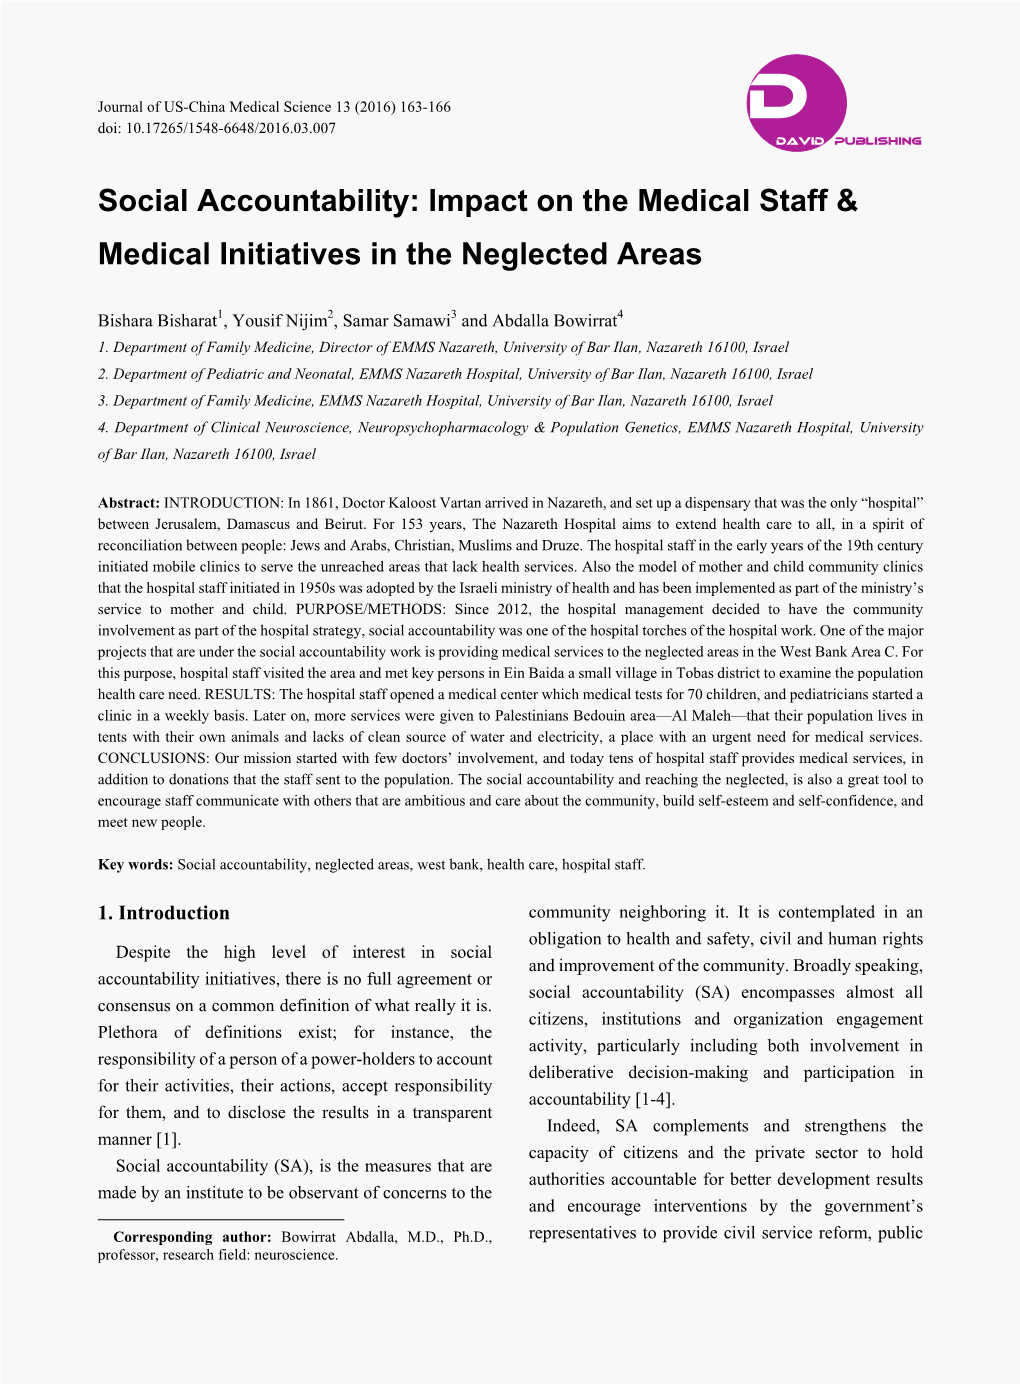 Social Accountability: Impact on the Medical Staff & Medical Initiatives in the Neglected Areas